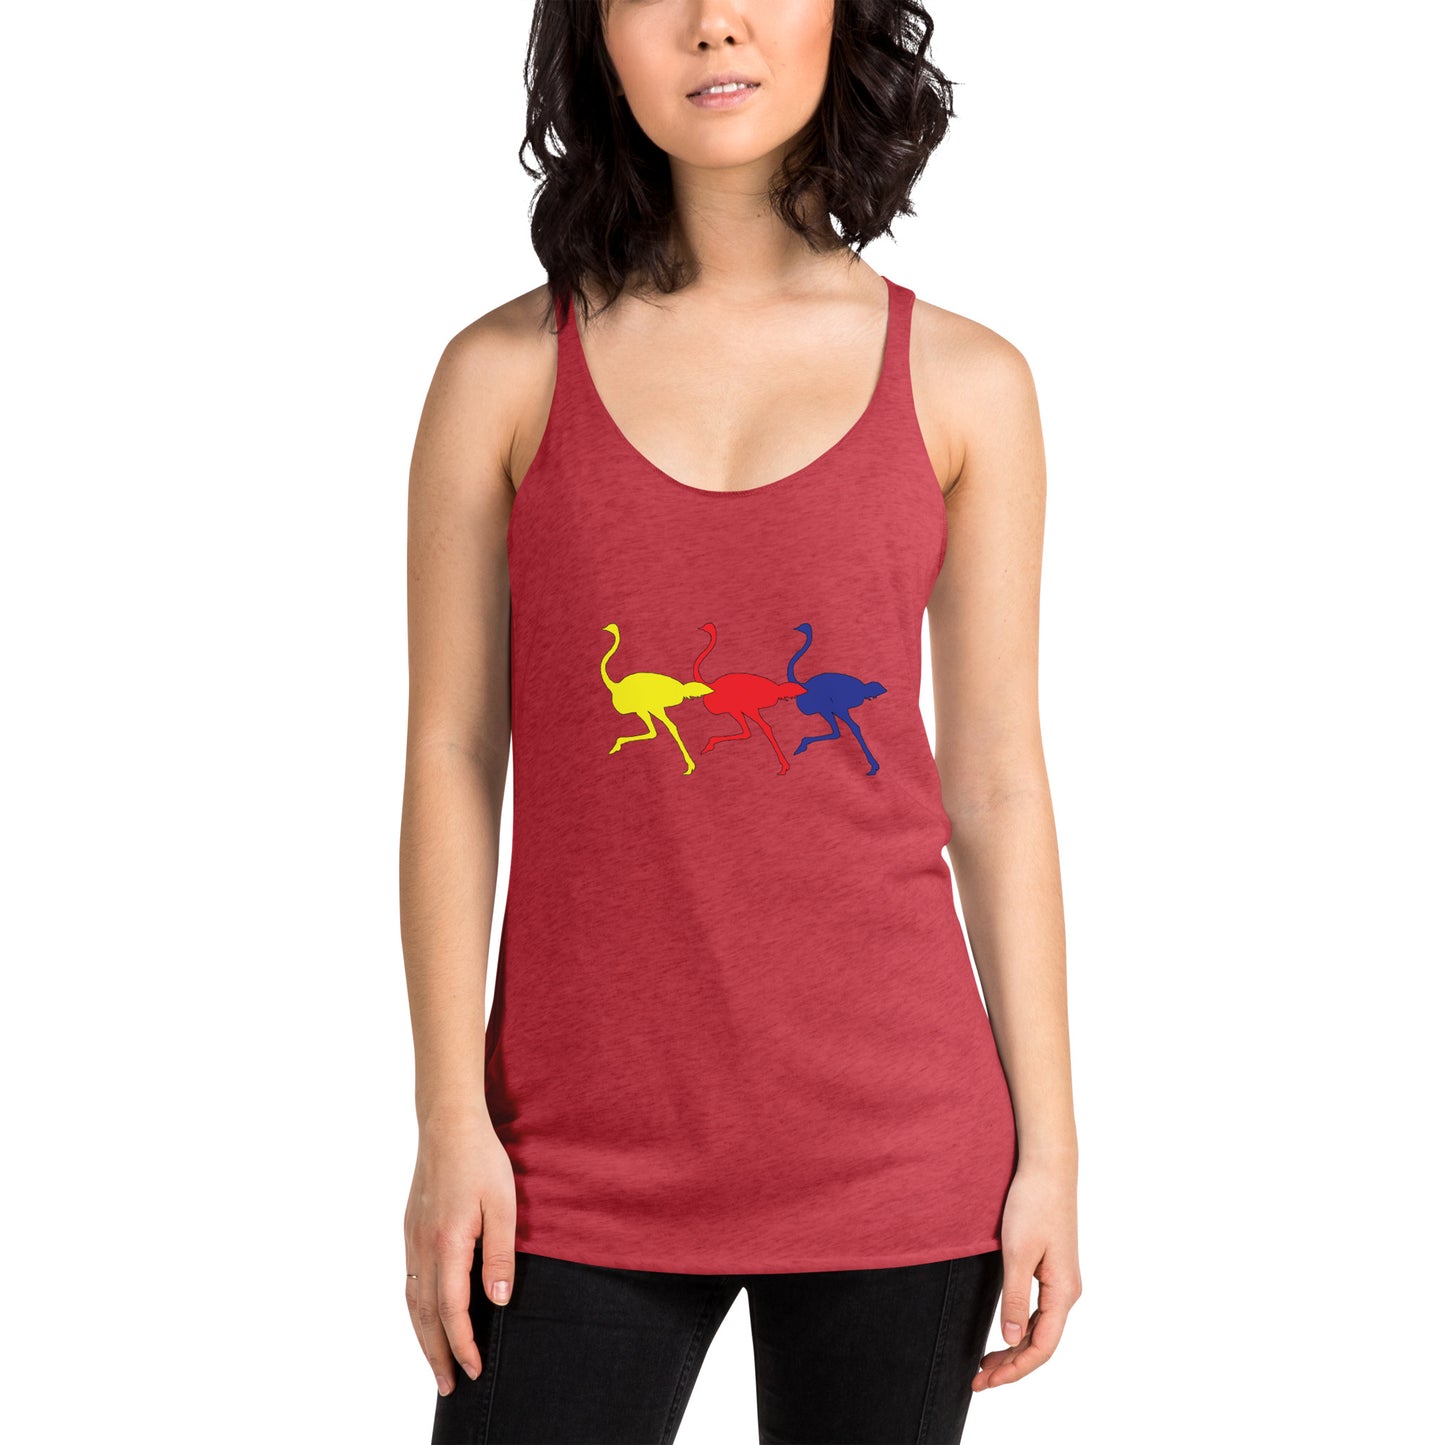 Womens Racerback Tank Top Printed with Colouful Running Ostriches